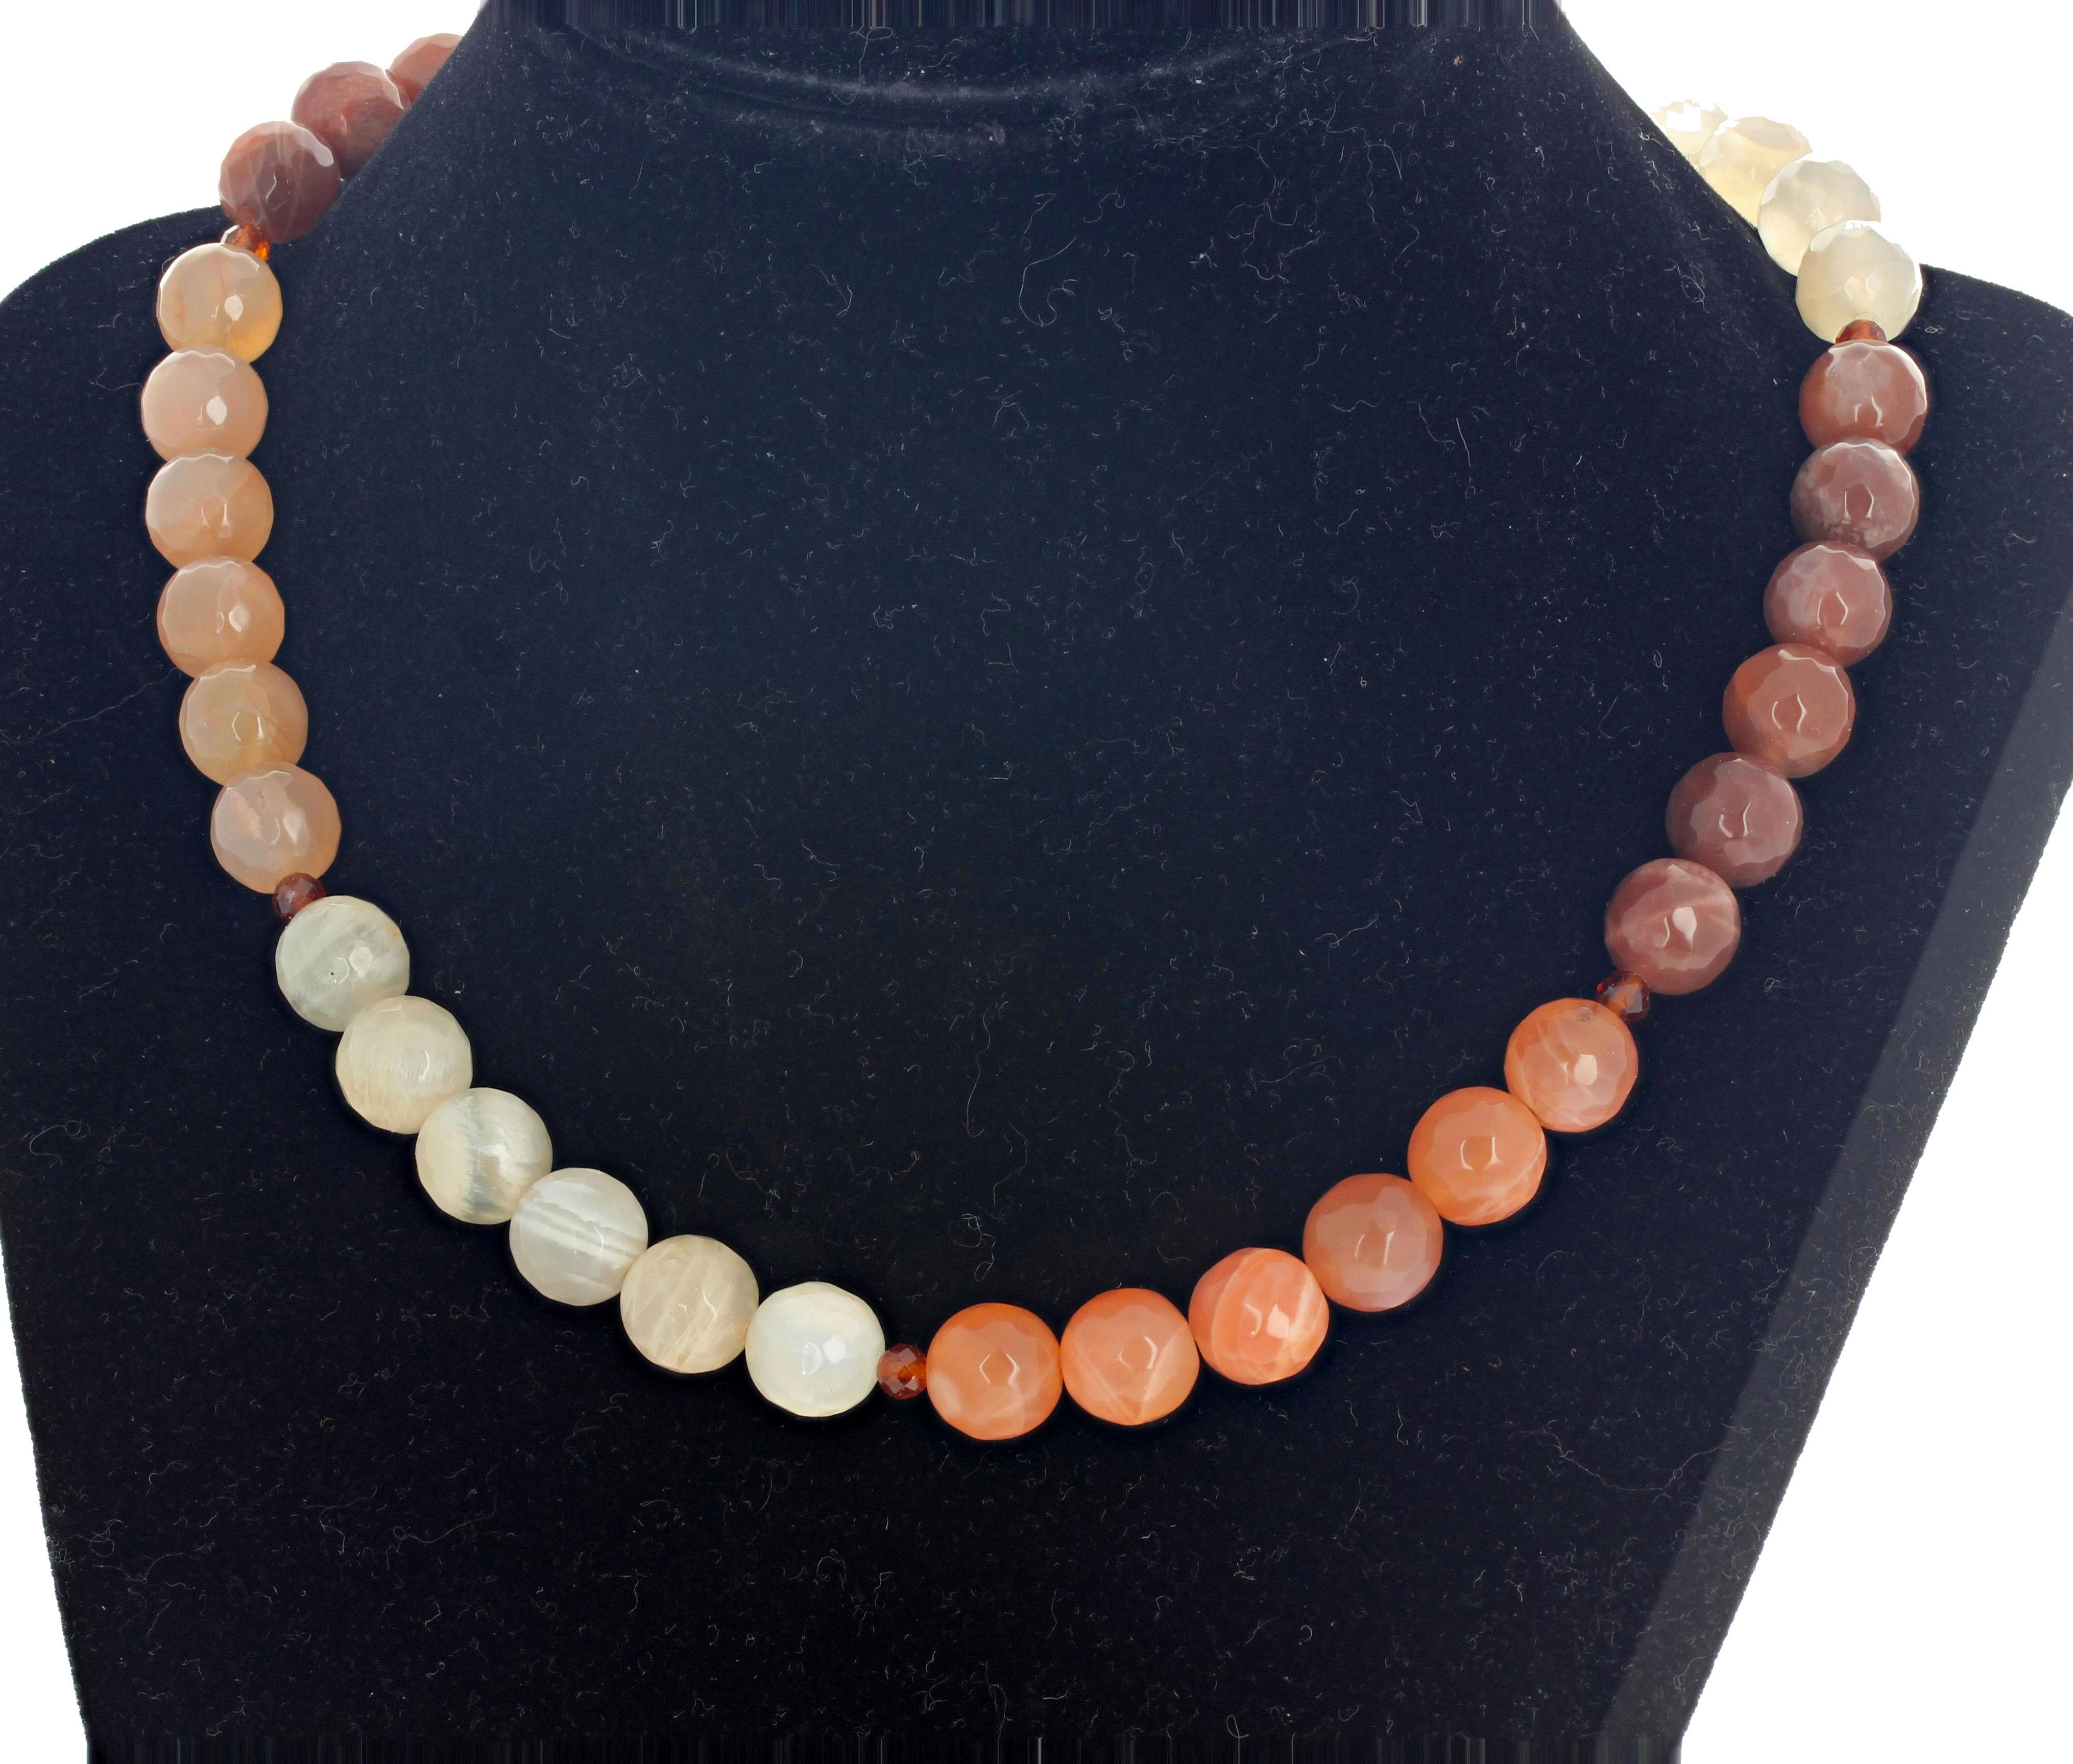 Beautiful checkerboard gem cut shining Moonstones  - creamy, light chocolate, and golden brown colors - happily enhanced with little natural real sparkling Hessonite Garnets in this lovely 17 inch long necklace with gold plated easy to use hook